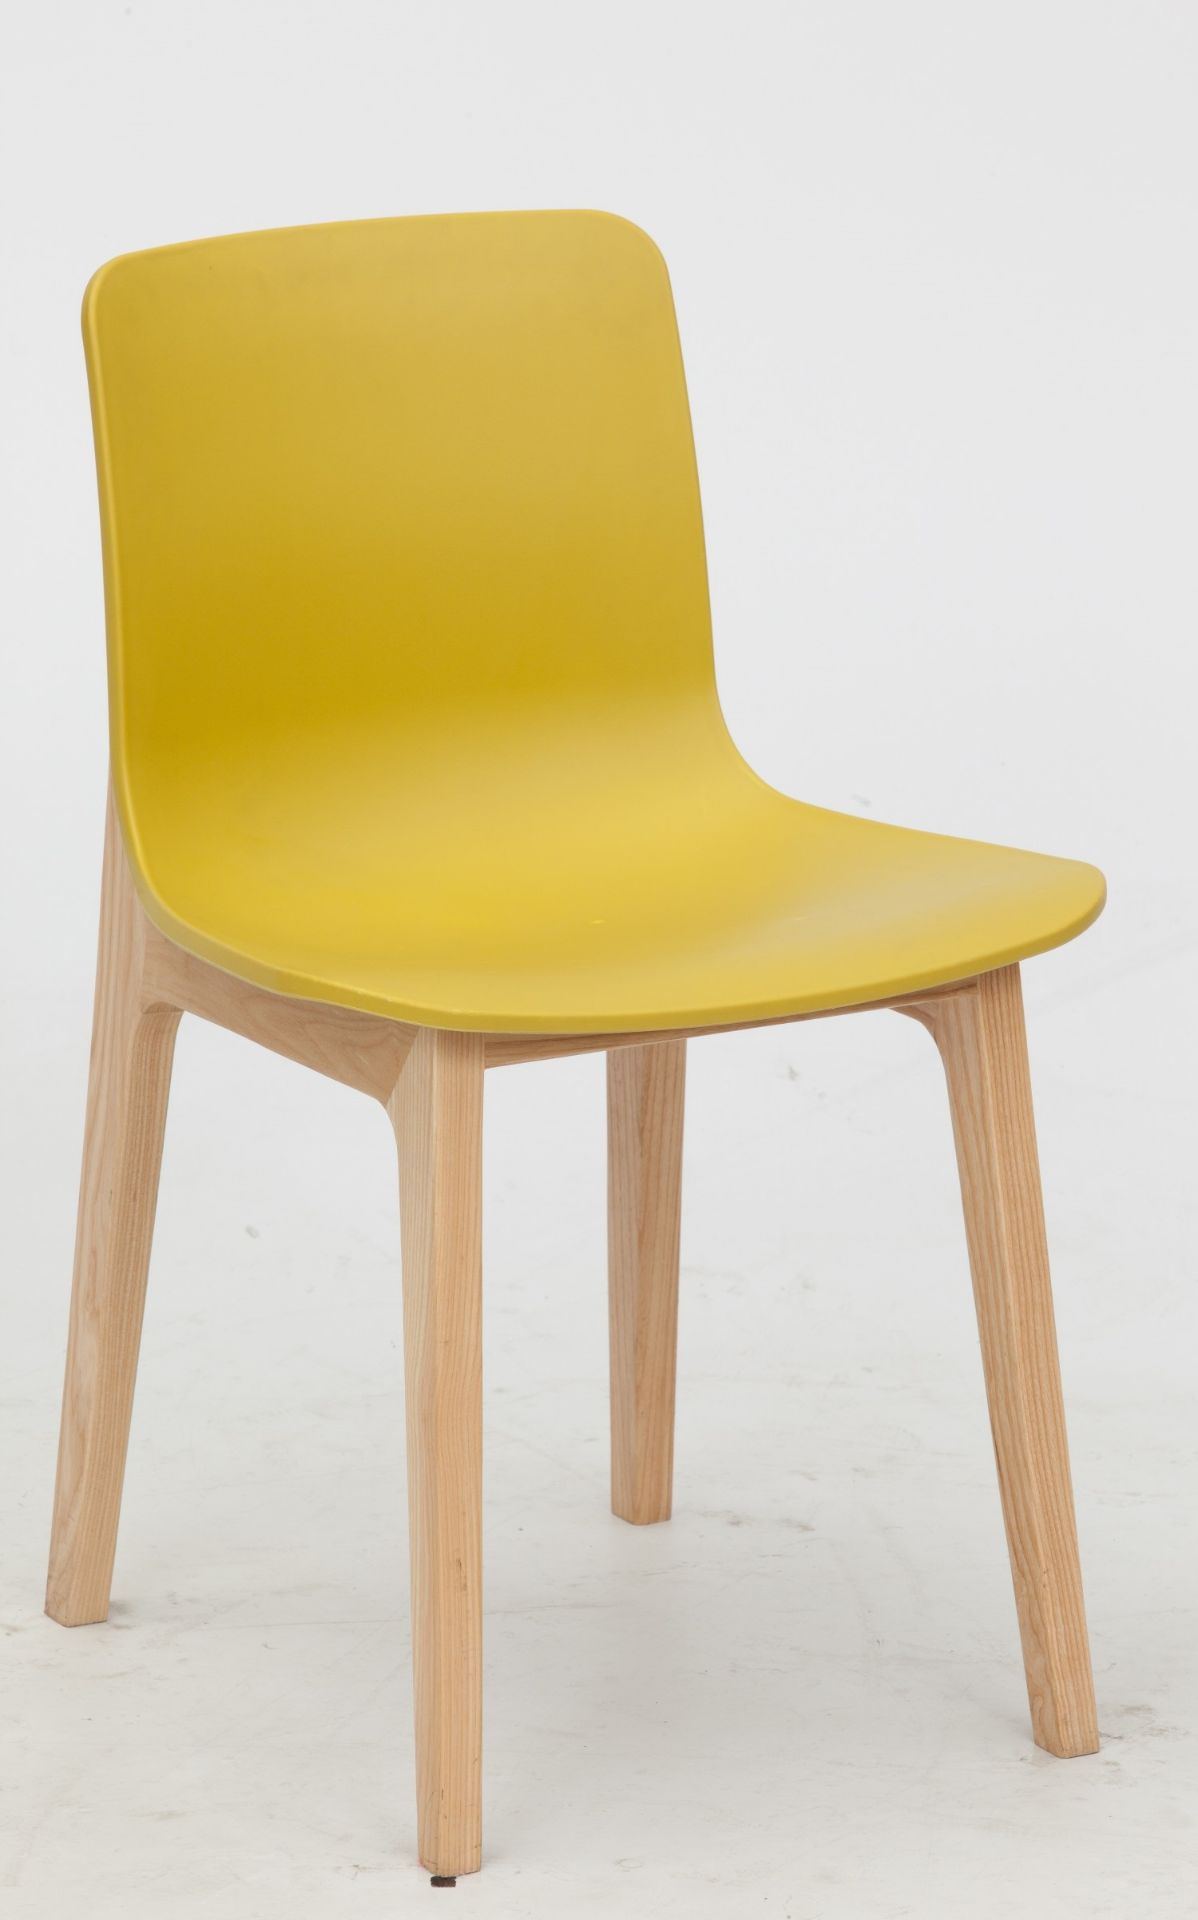 4 x Swift DC-782W Dining Chairs With Chartreuse ABS Seats and Natural Wood Bases - Approx RRP £360! - Image 5 of 6